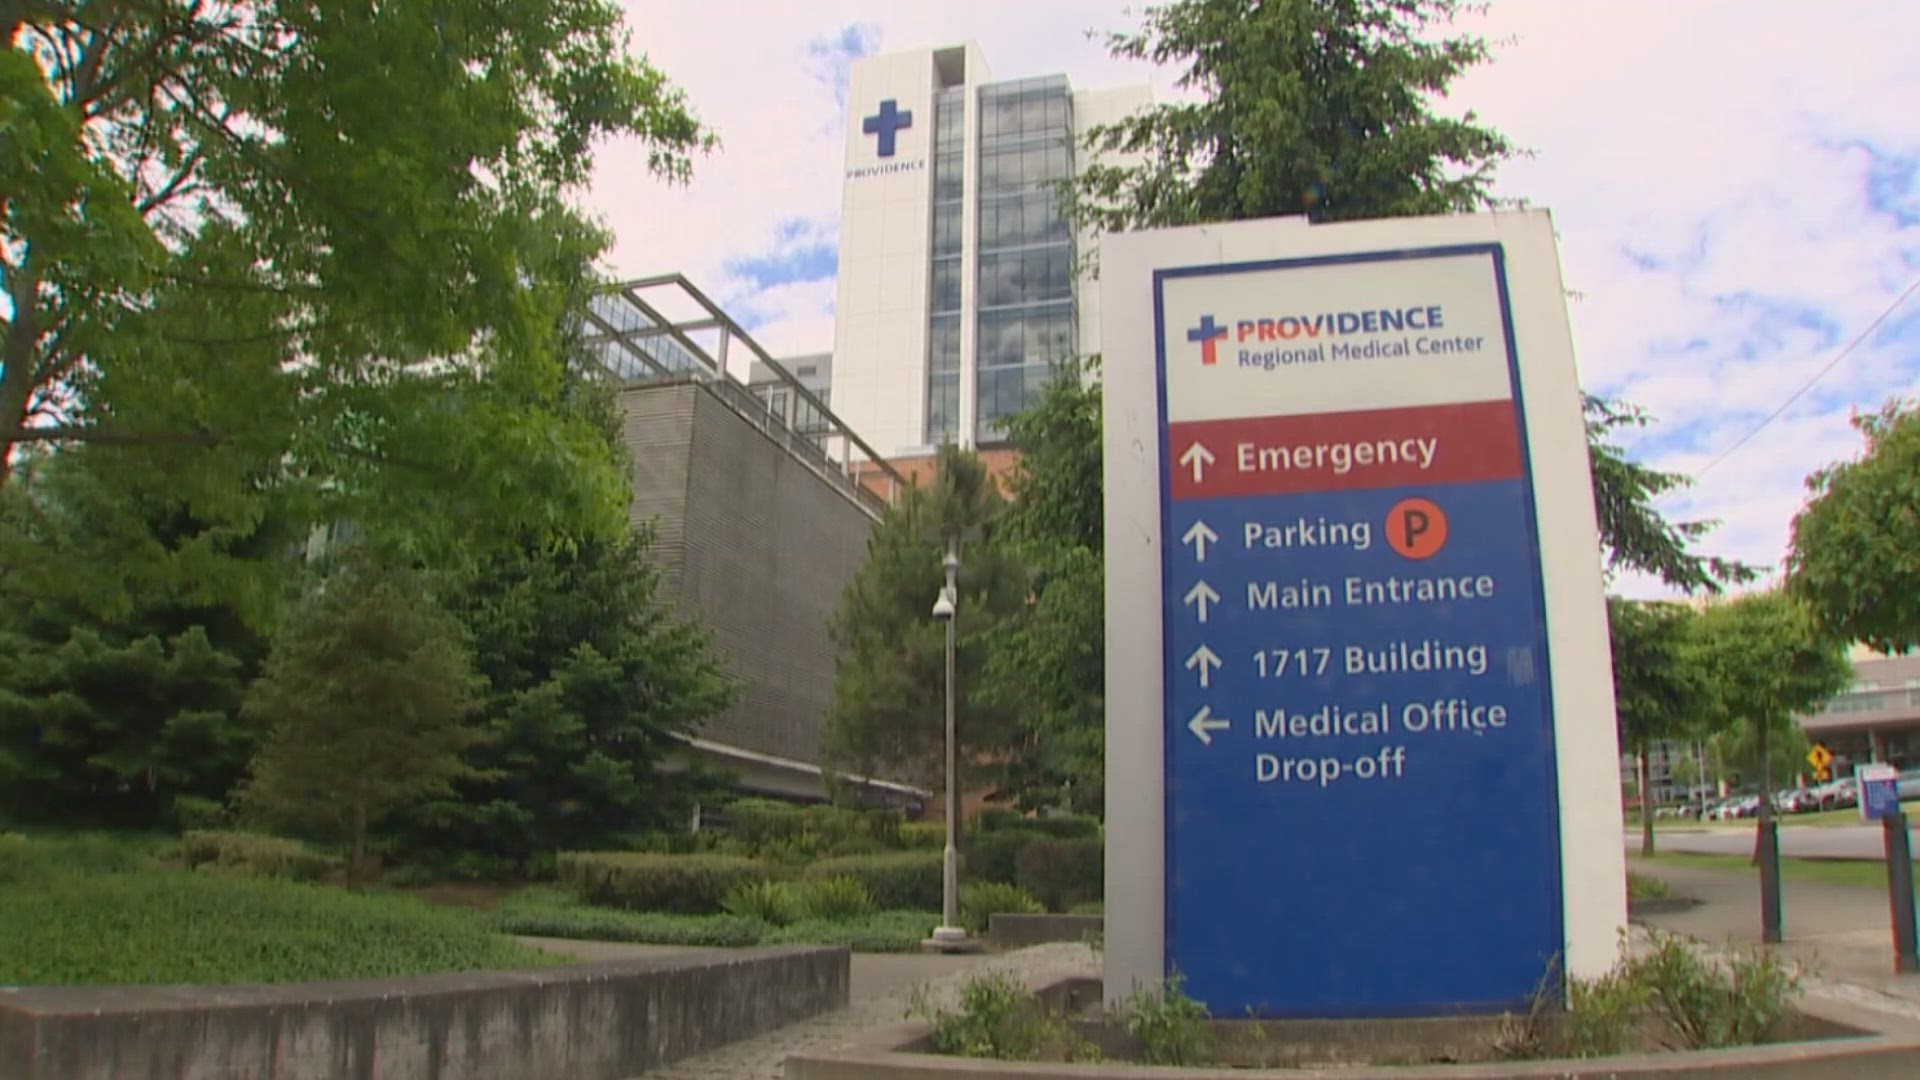 Nurses say the lack of staff at Providence of Everett is reaching a critical point and is unsafe for patients